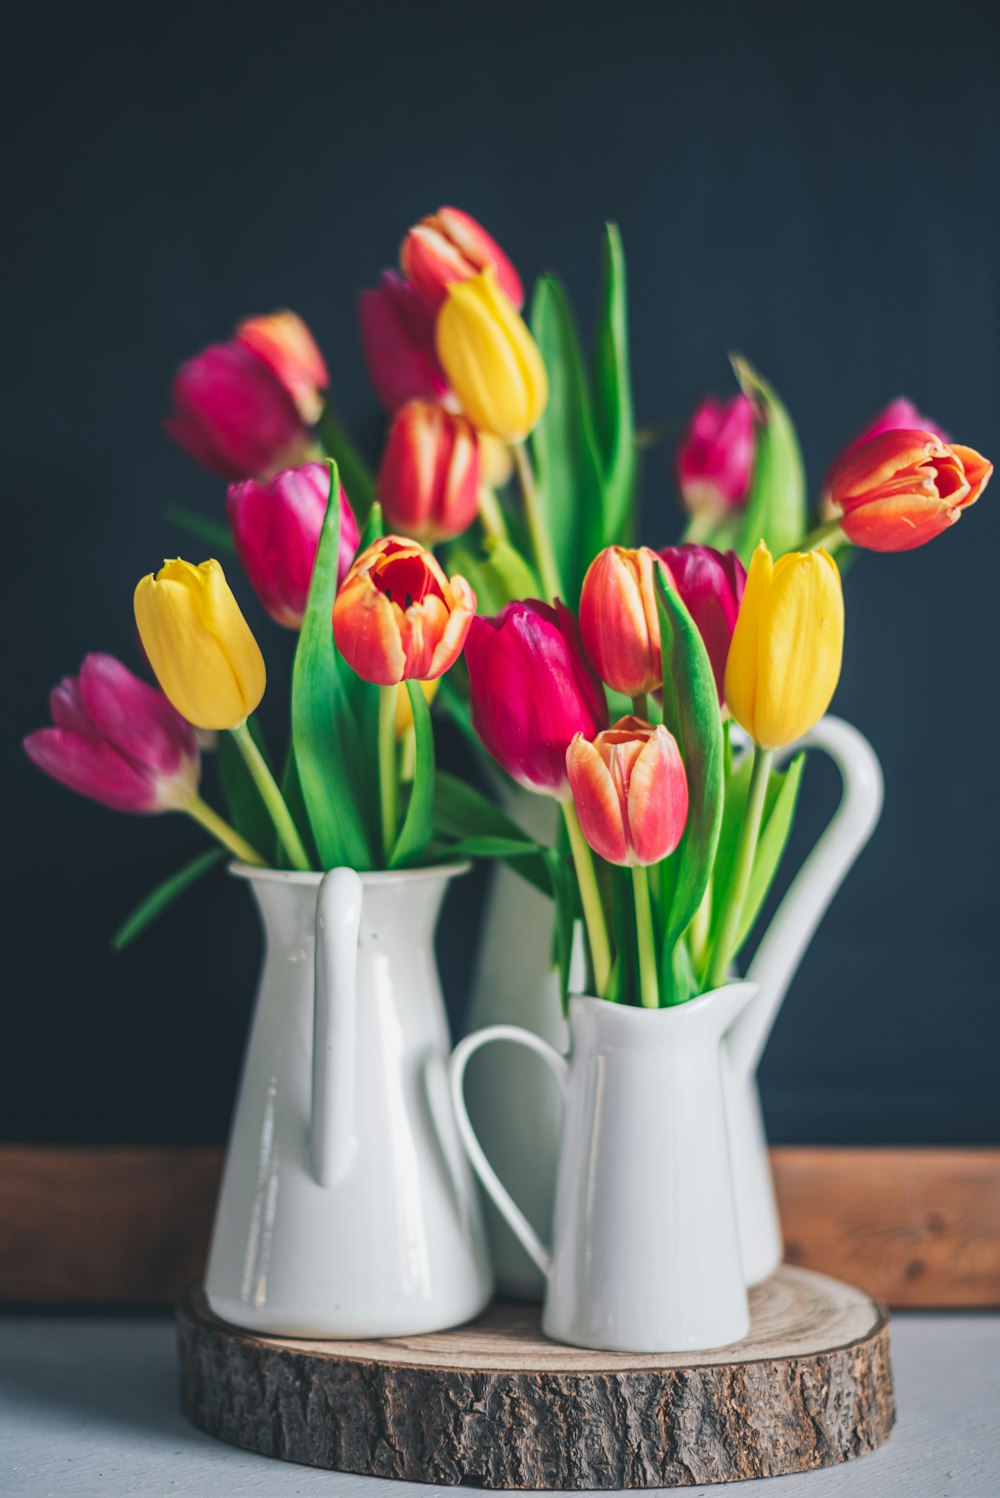 red and yellow tulips in white ceramic vase